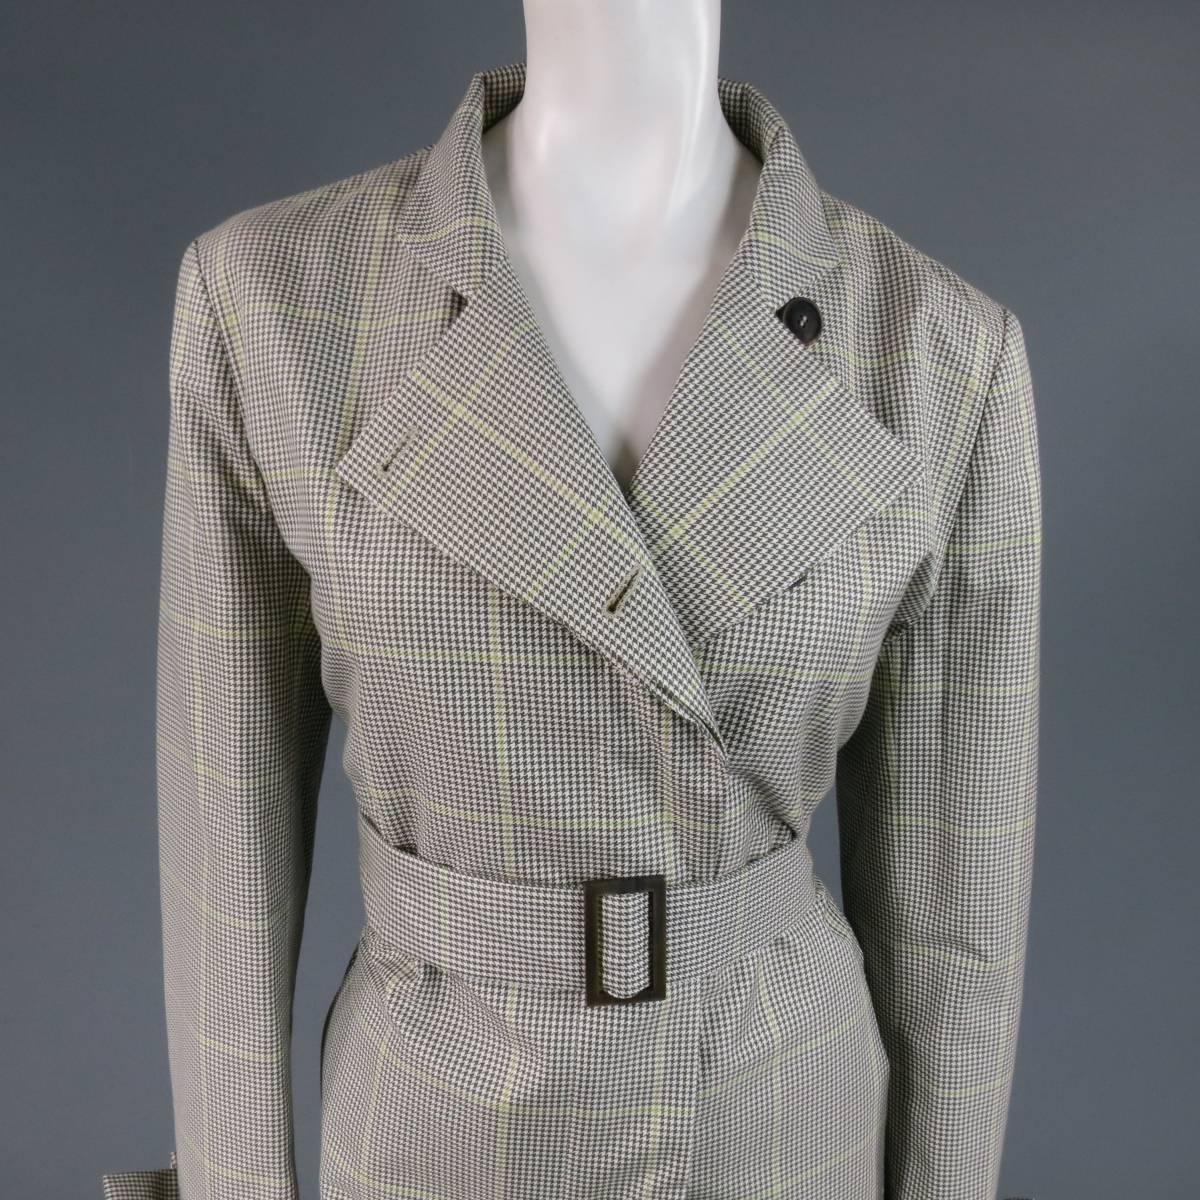 This lovely LORO PIANA "Storm System" trench coat comes in a beige cotton silk blend with all over olive and green Glenplaid print and features a folded collar, hidden placket button up closure, slit cuffed sleeves, belted waist, and green